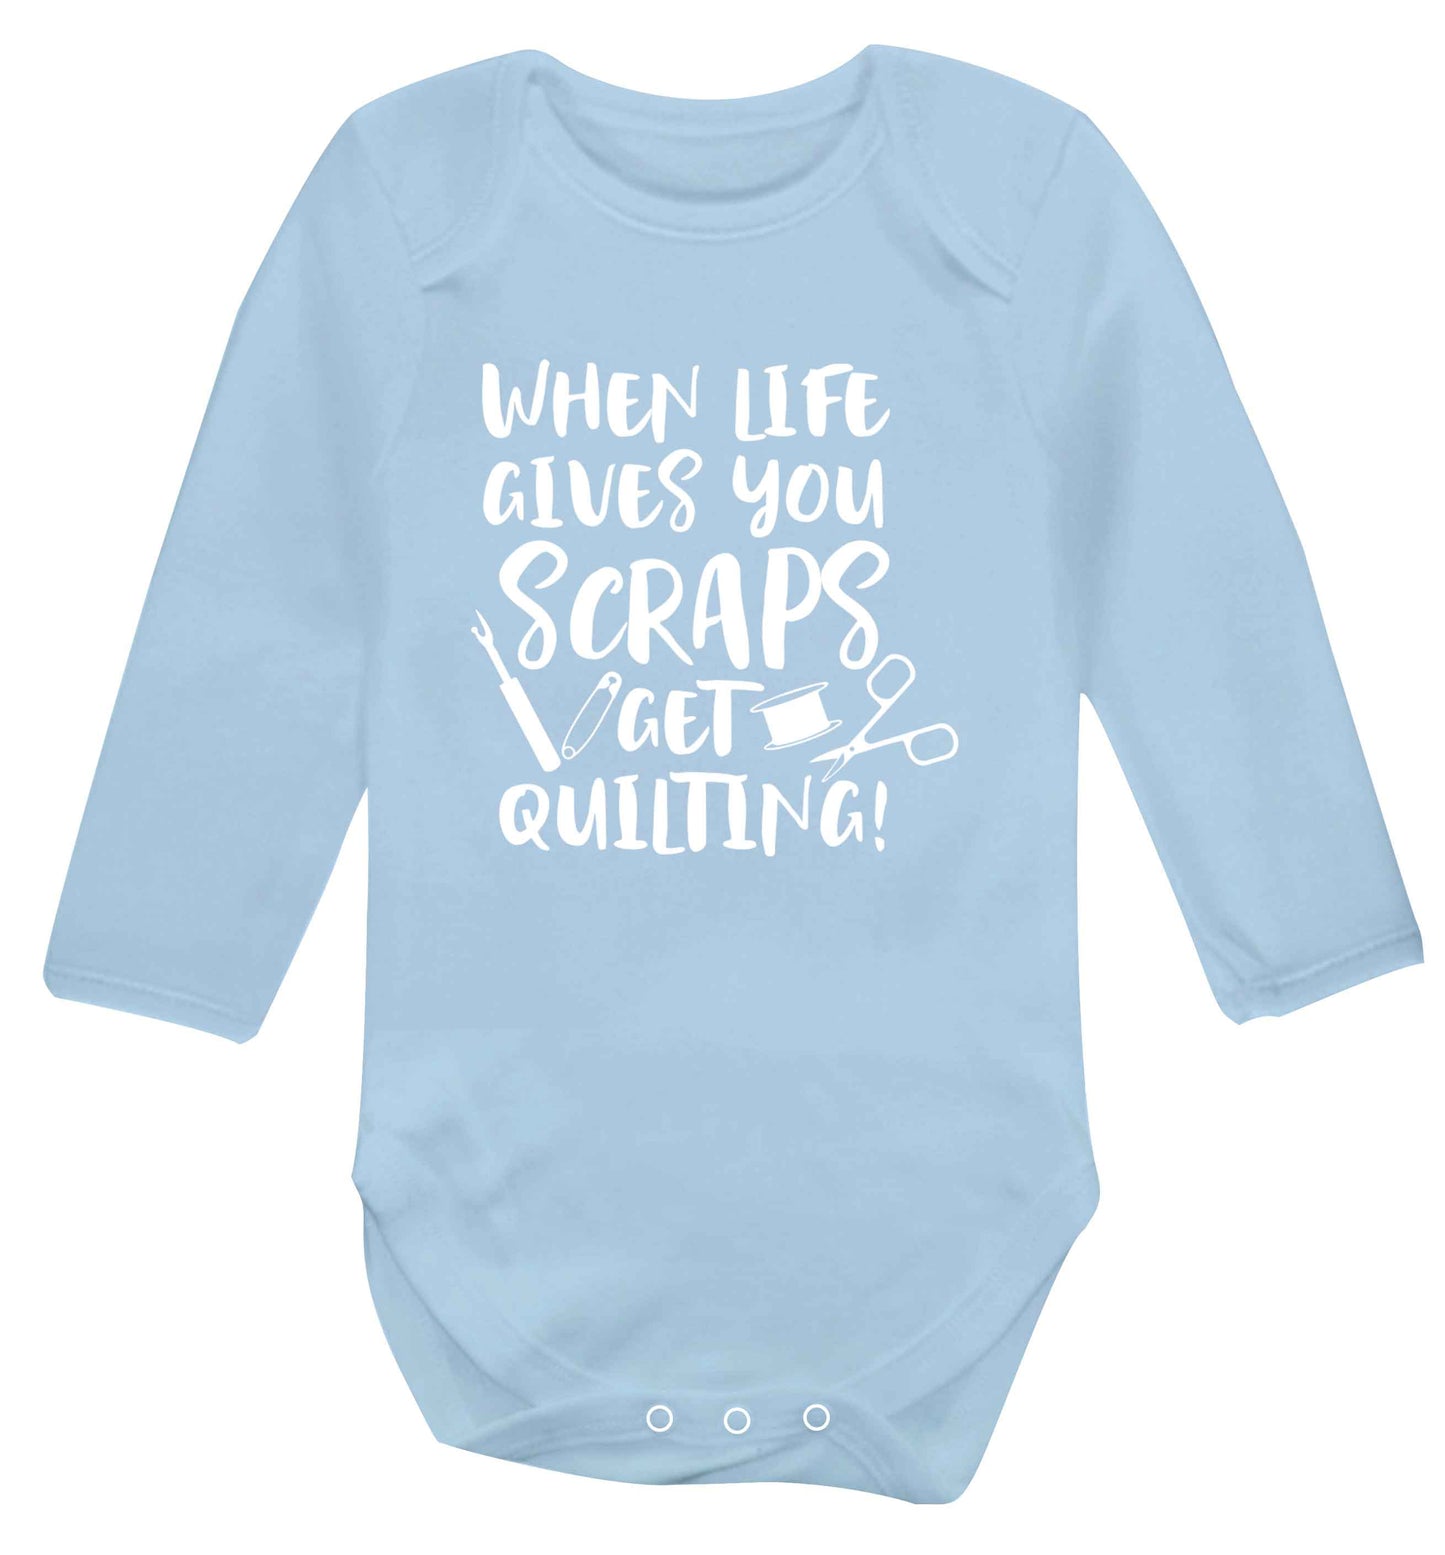 When life gives you scraps get quilting! Baby Vest long sleeved pale blue 6-12 months